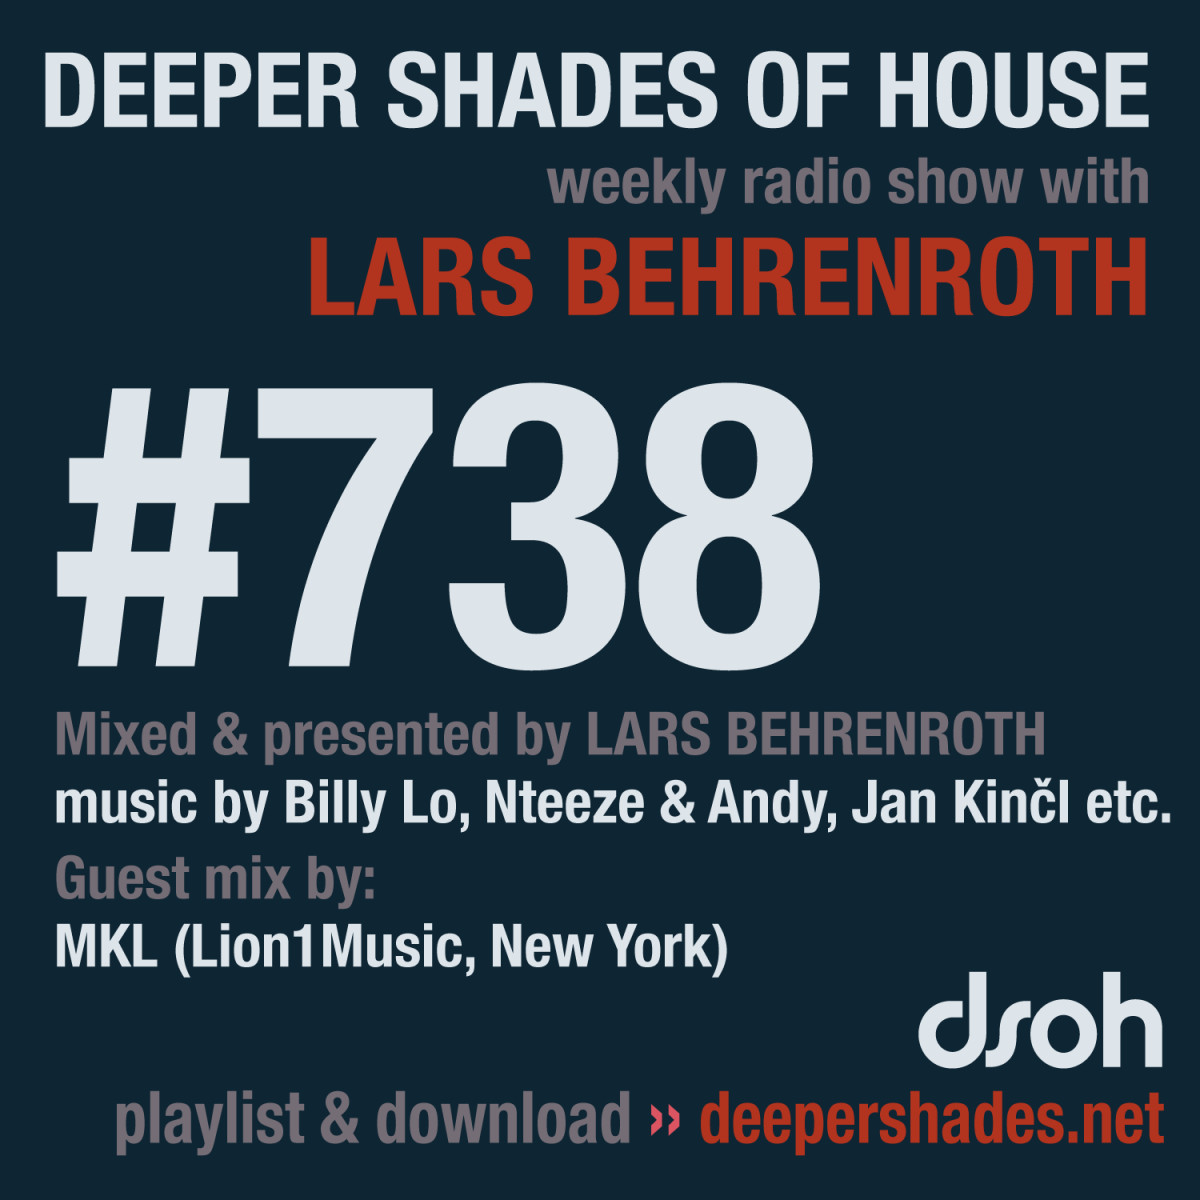 #nowplaying on radio.deepershades.net : Lars Behrenroth w/ exclusive guest mix by MKL (Lion1Music, New York) - DSOH #738 Deeper Shades Of House #deephouse #livestream #dsoh #housemusic